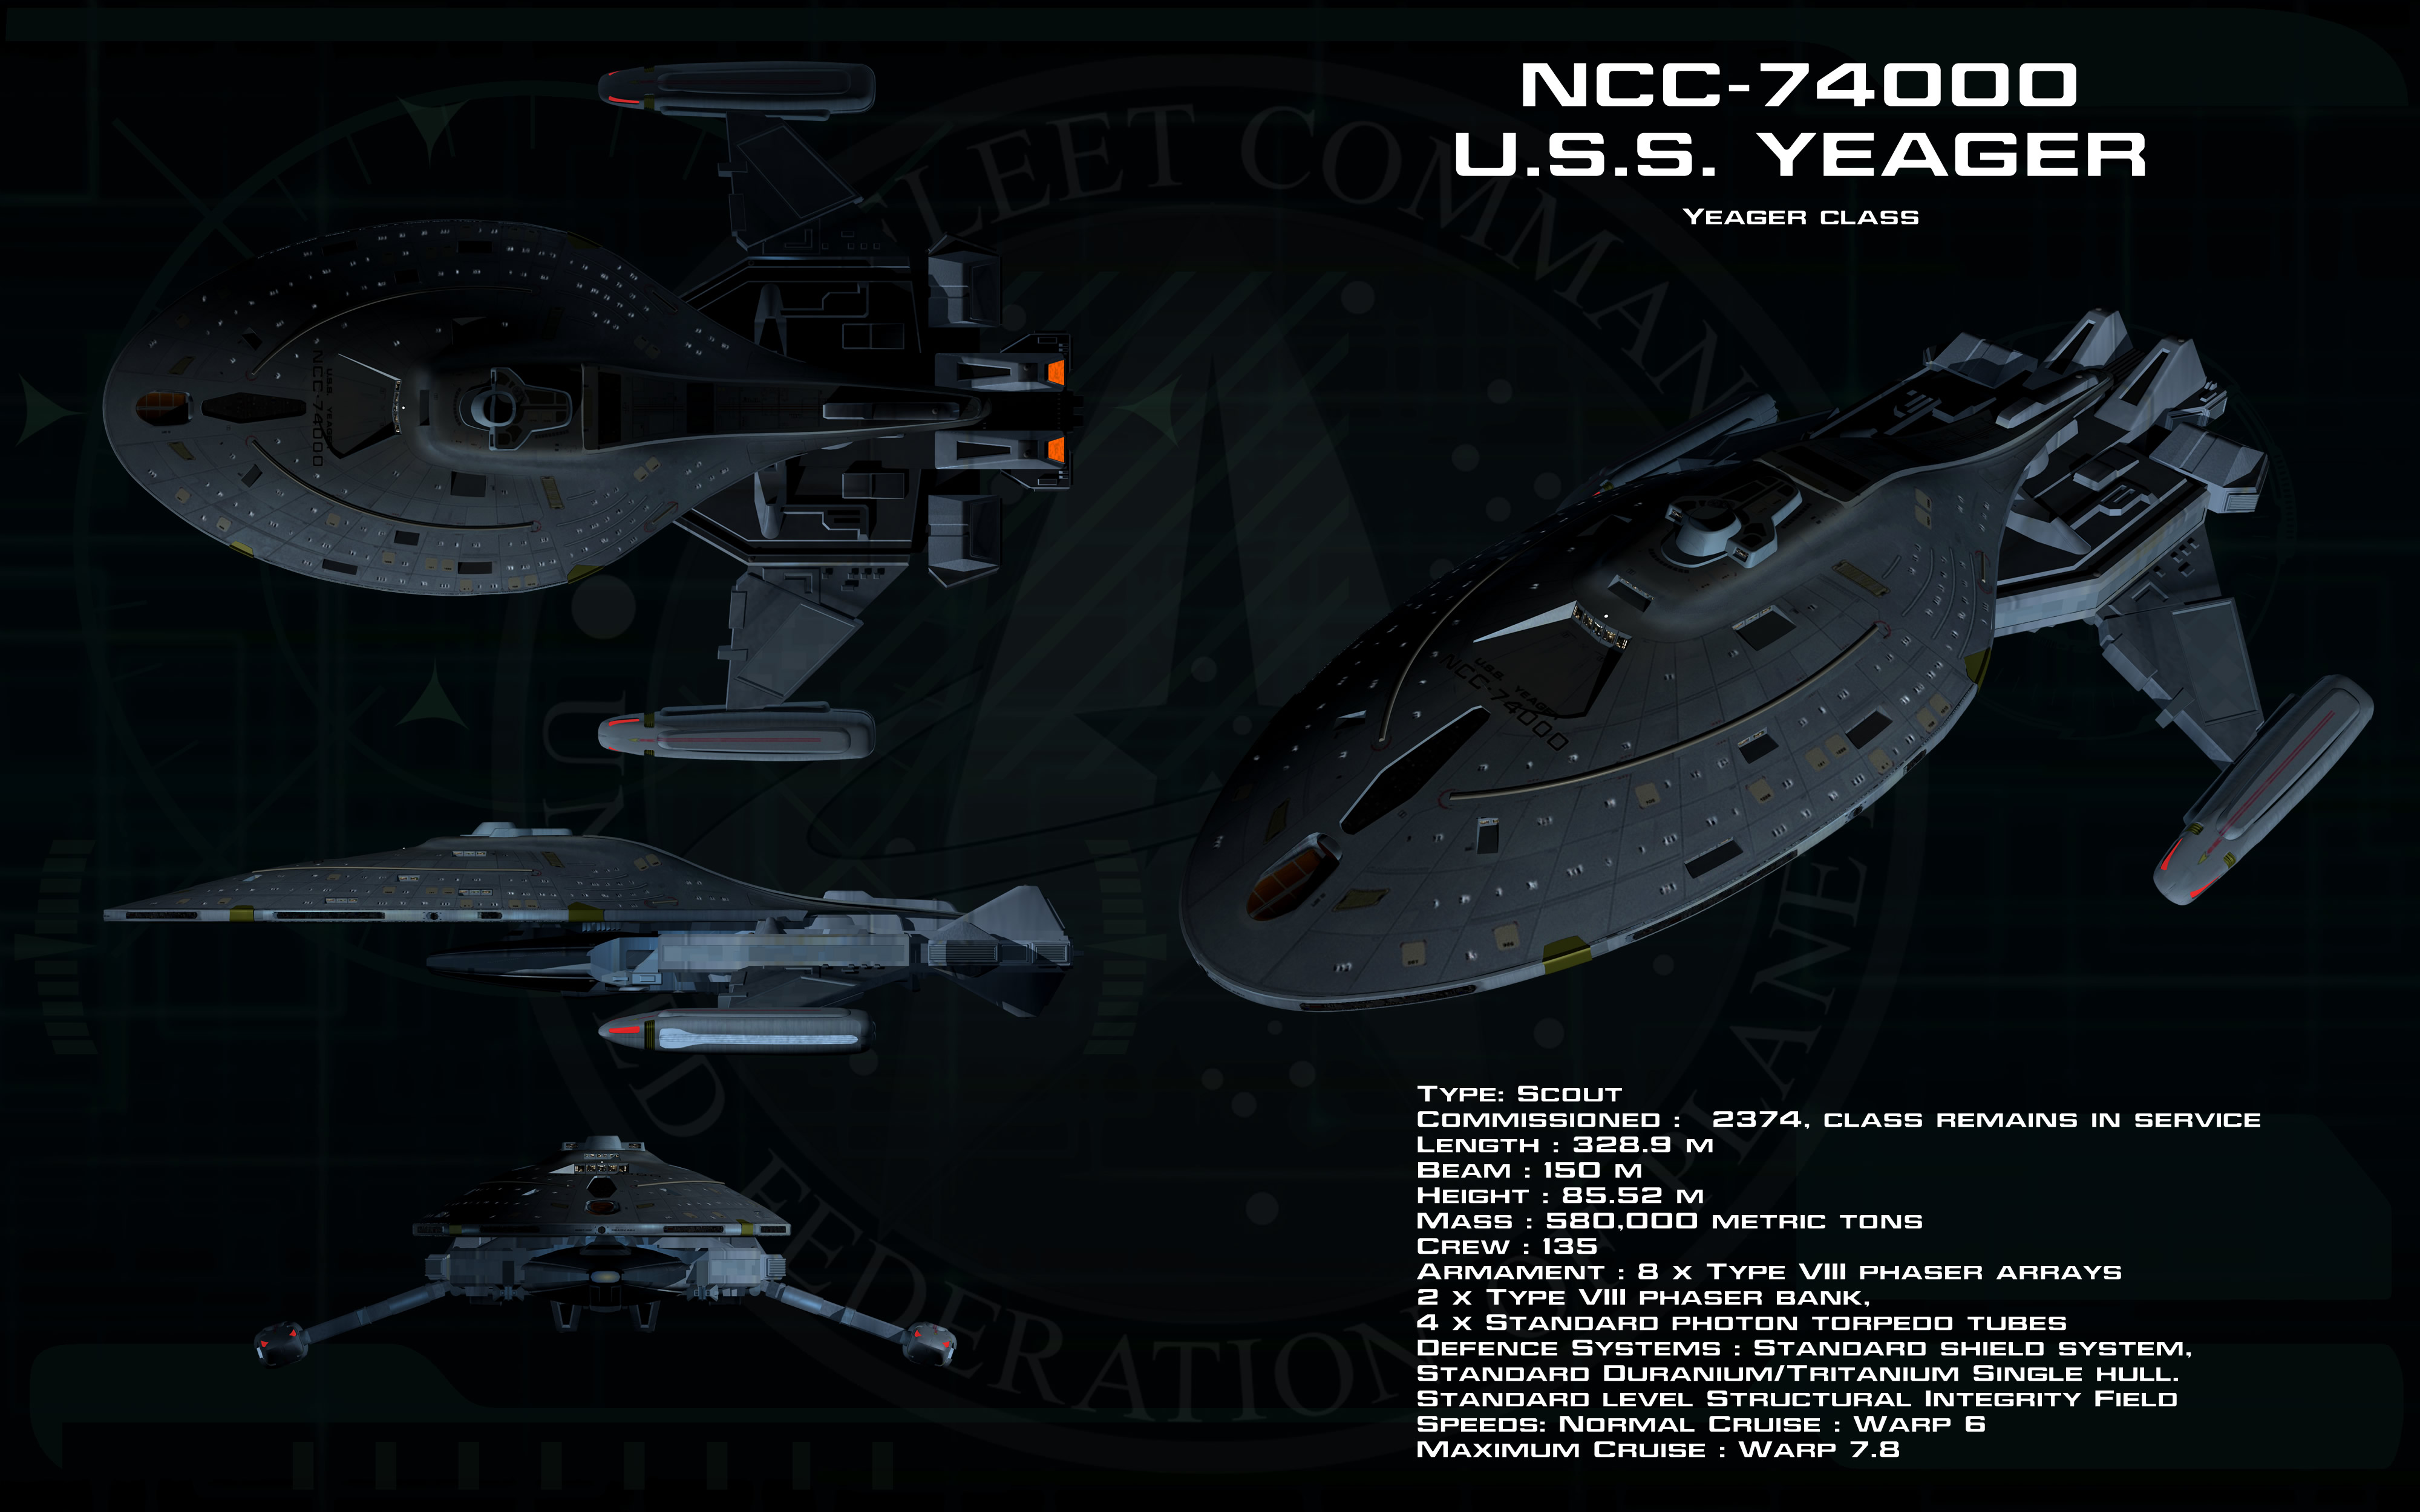 yeager_class_ortho___uss_yeager_by_unusualsuspex-d6tchq8.jpg